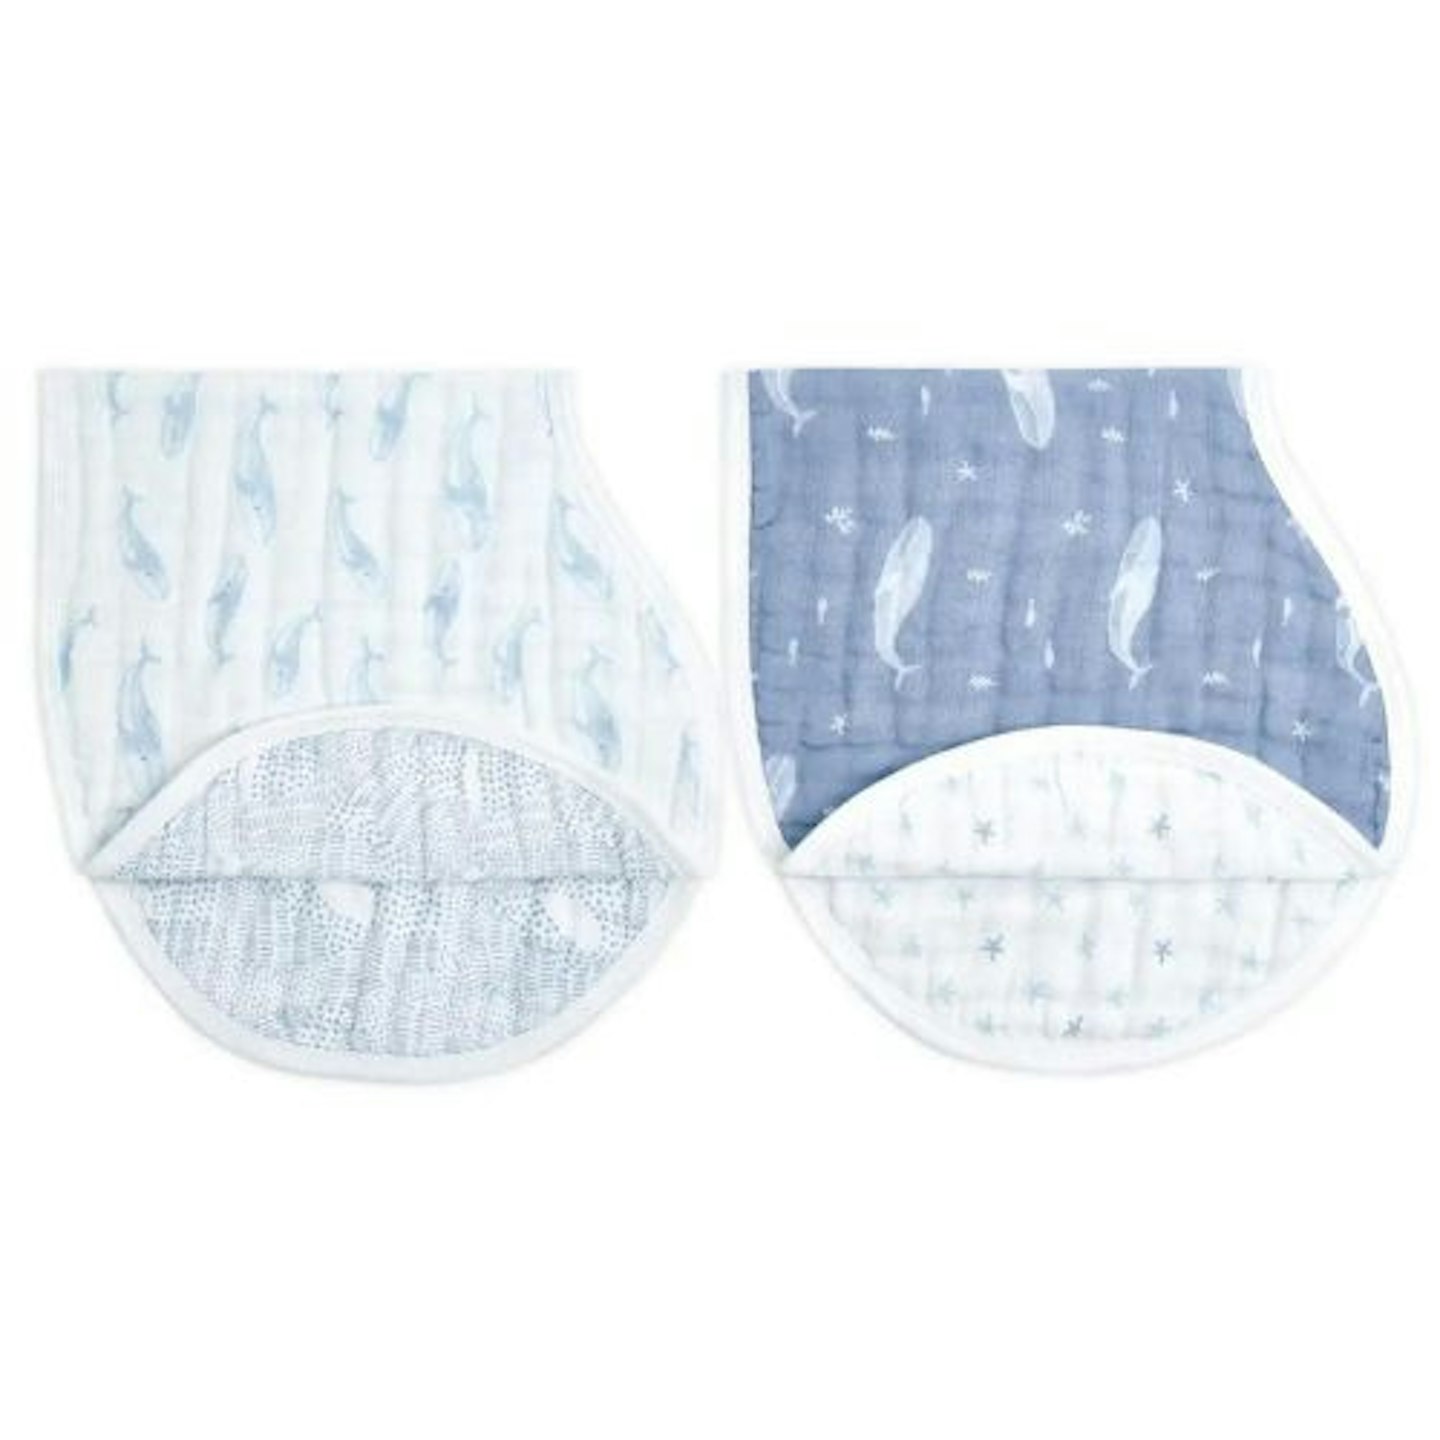 aden + anais baby products - Oceanic: Organic Cotton Burpy Bibs 2 Pack